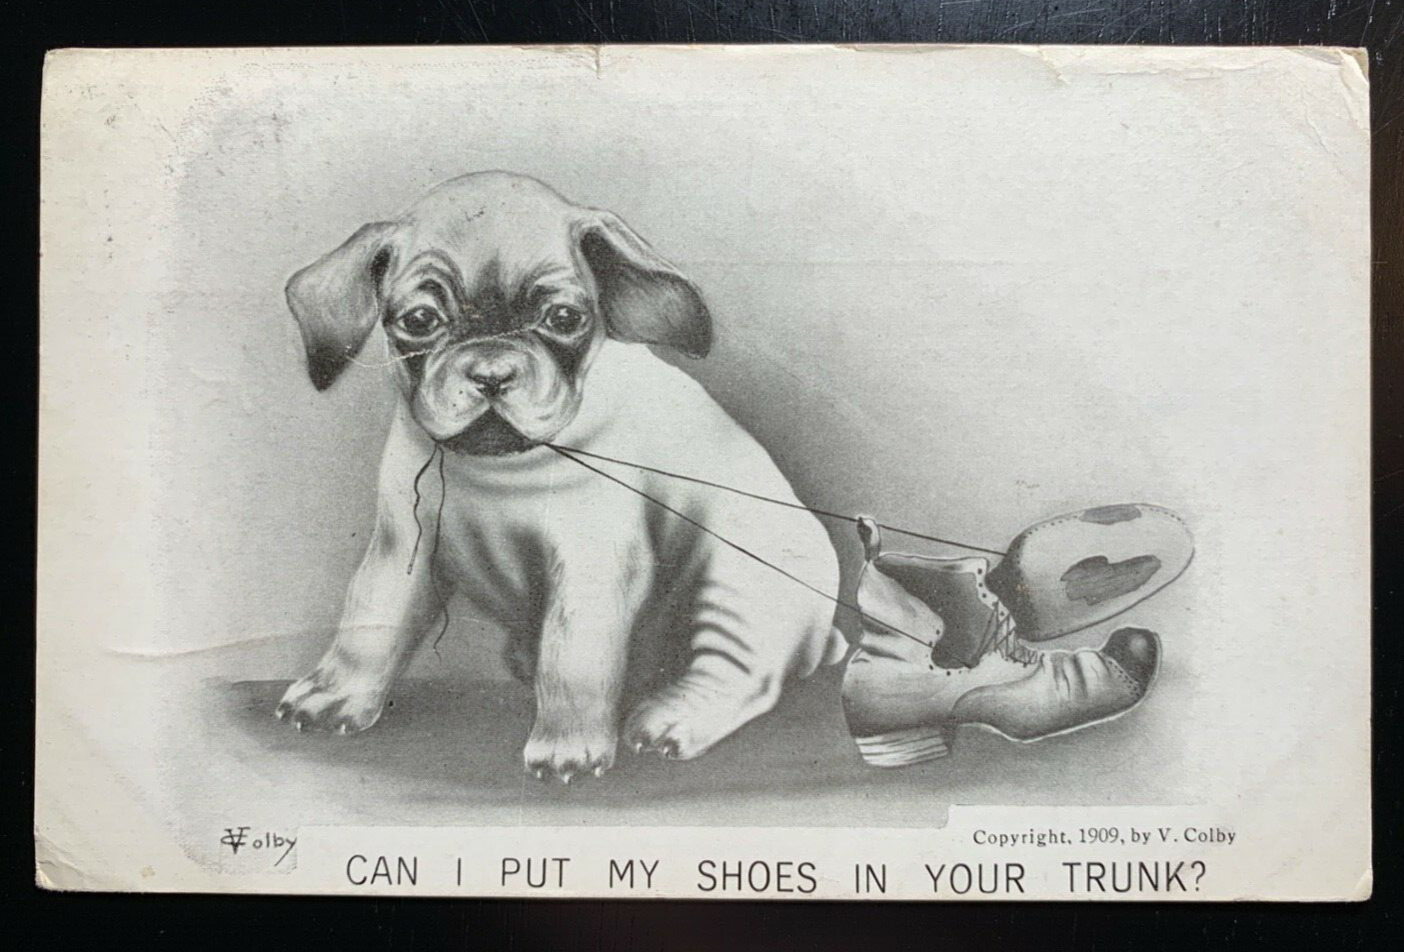 Postcard Artist: Volby Puppy Dog Playing with Shoes